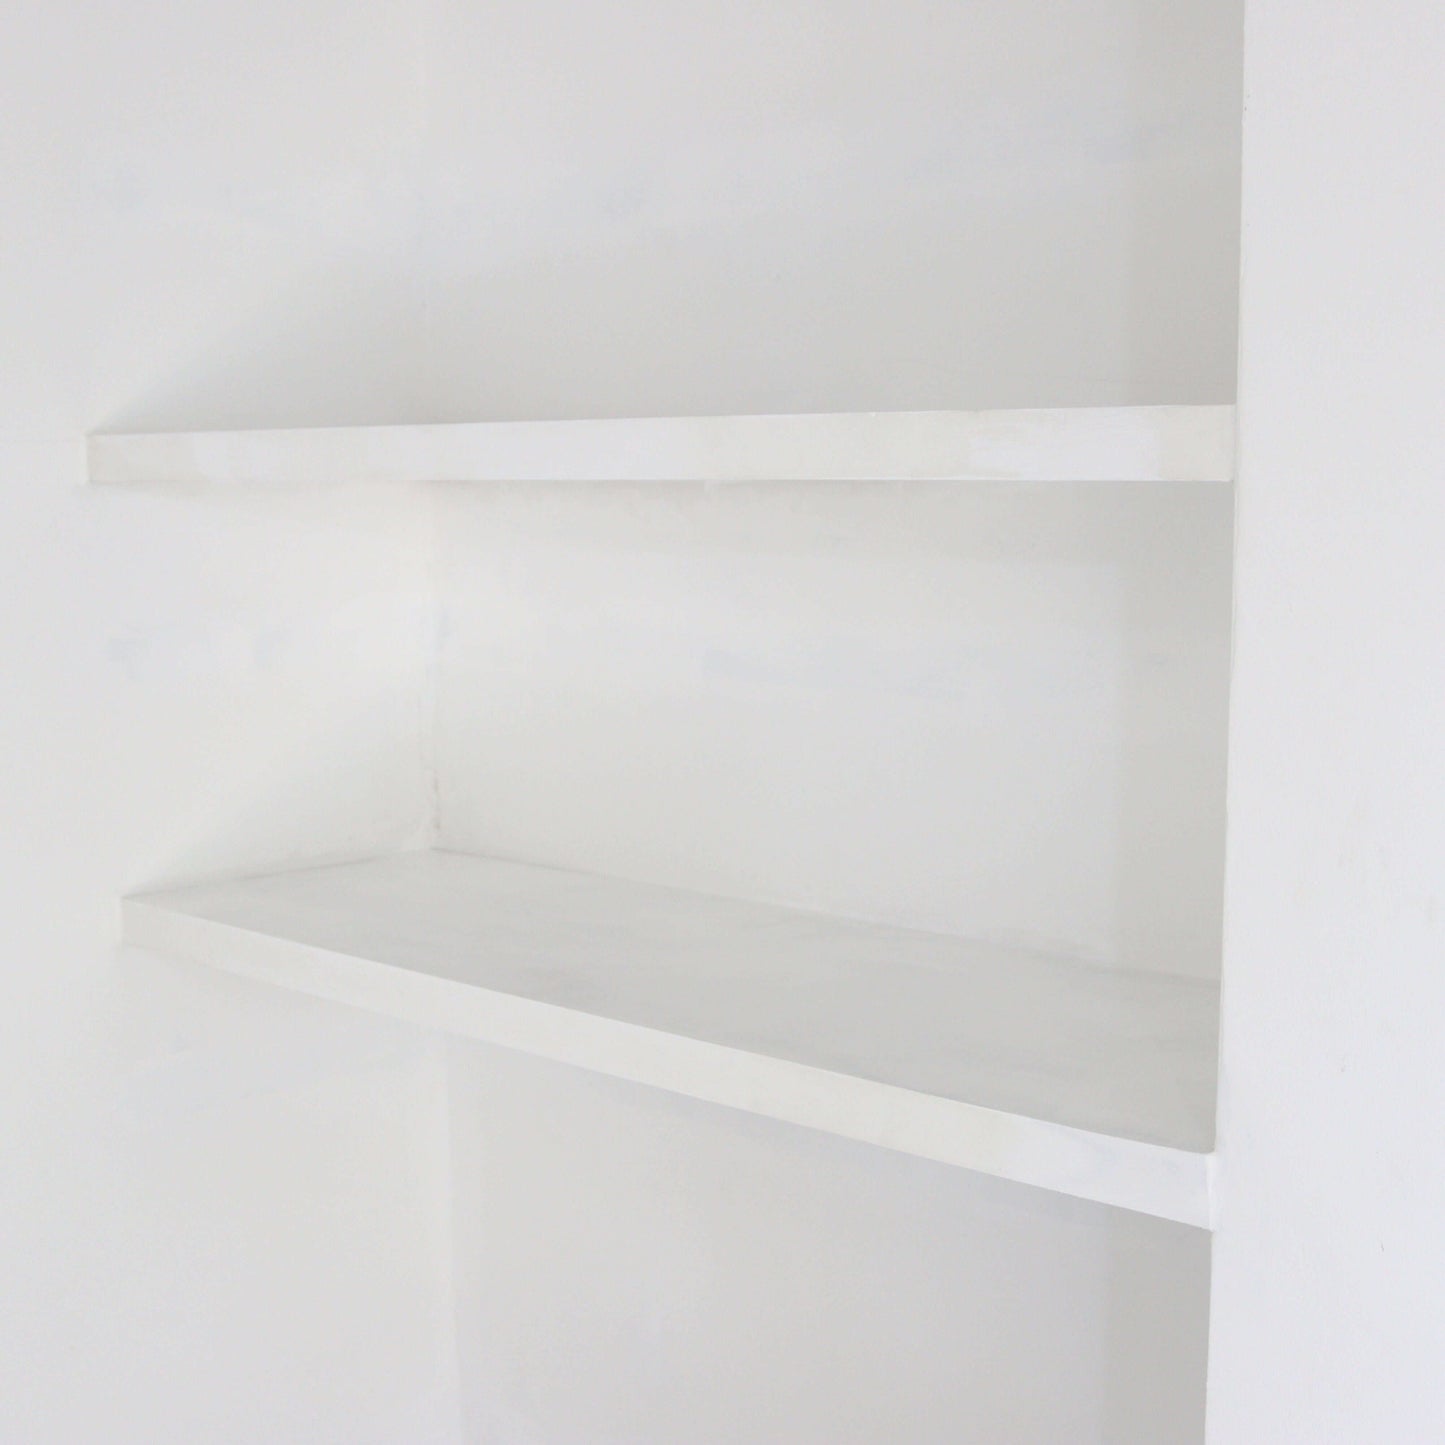 Paintable Floating Shelves - 58 cm by 16 cm